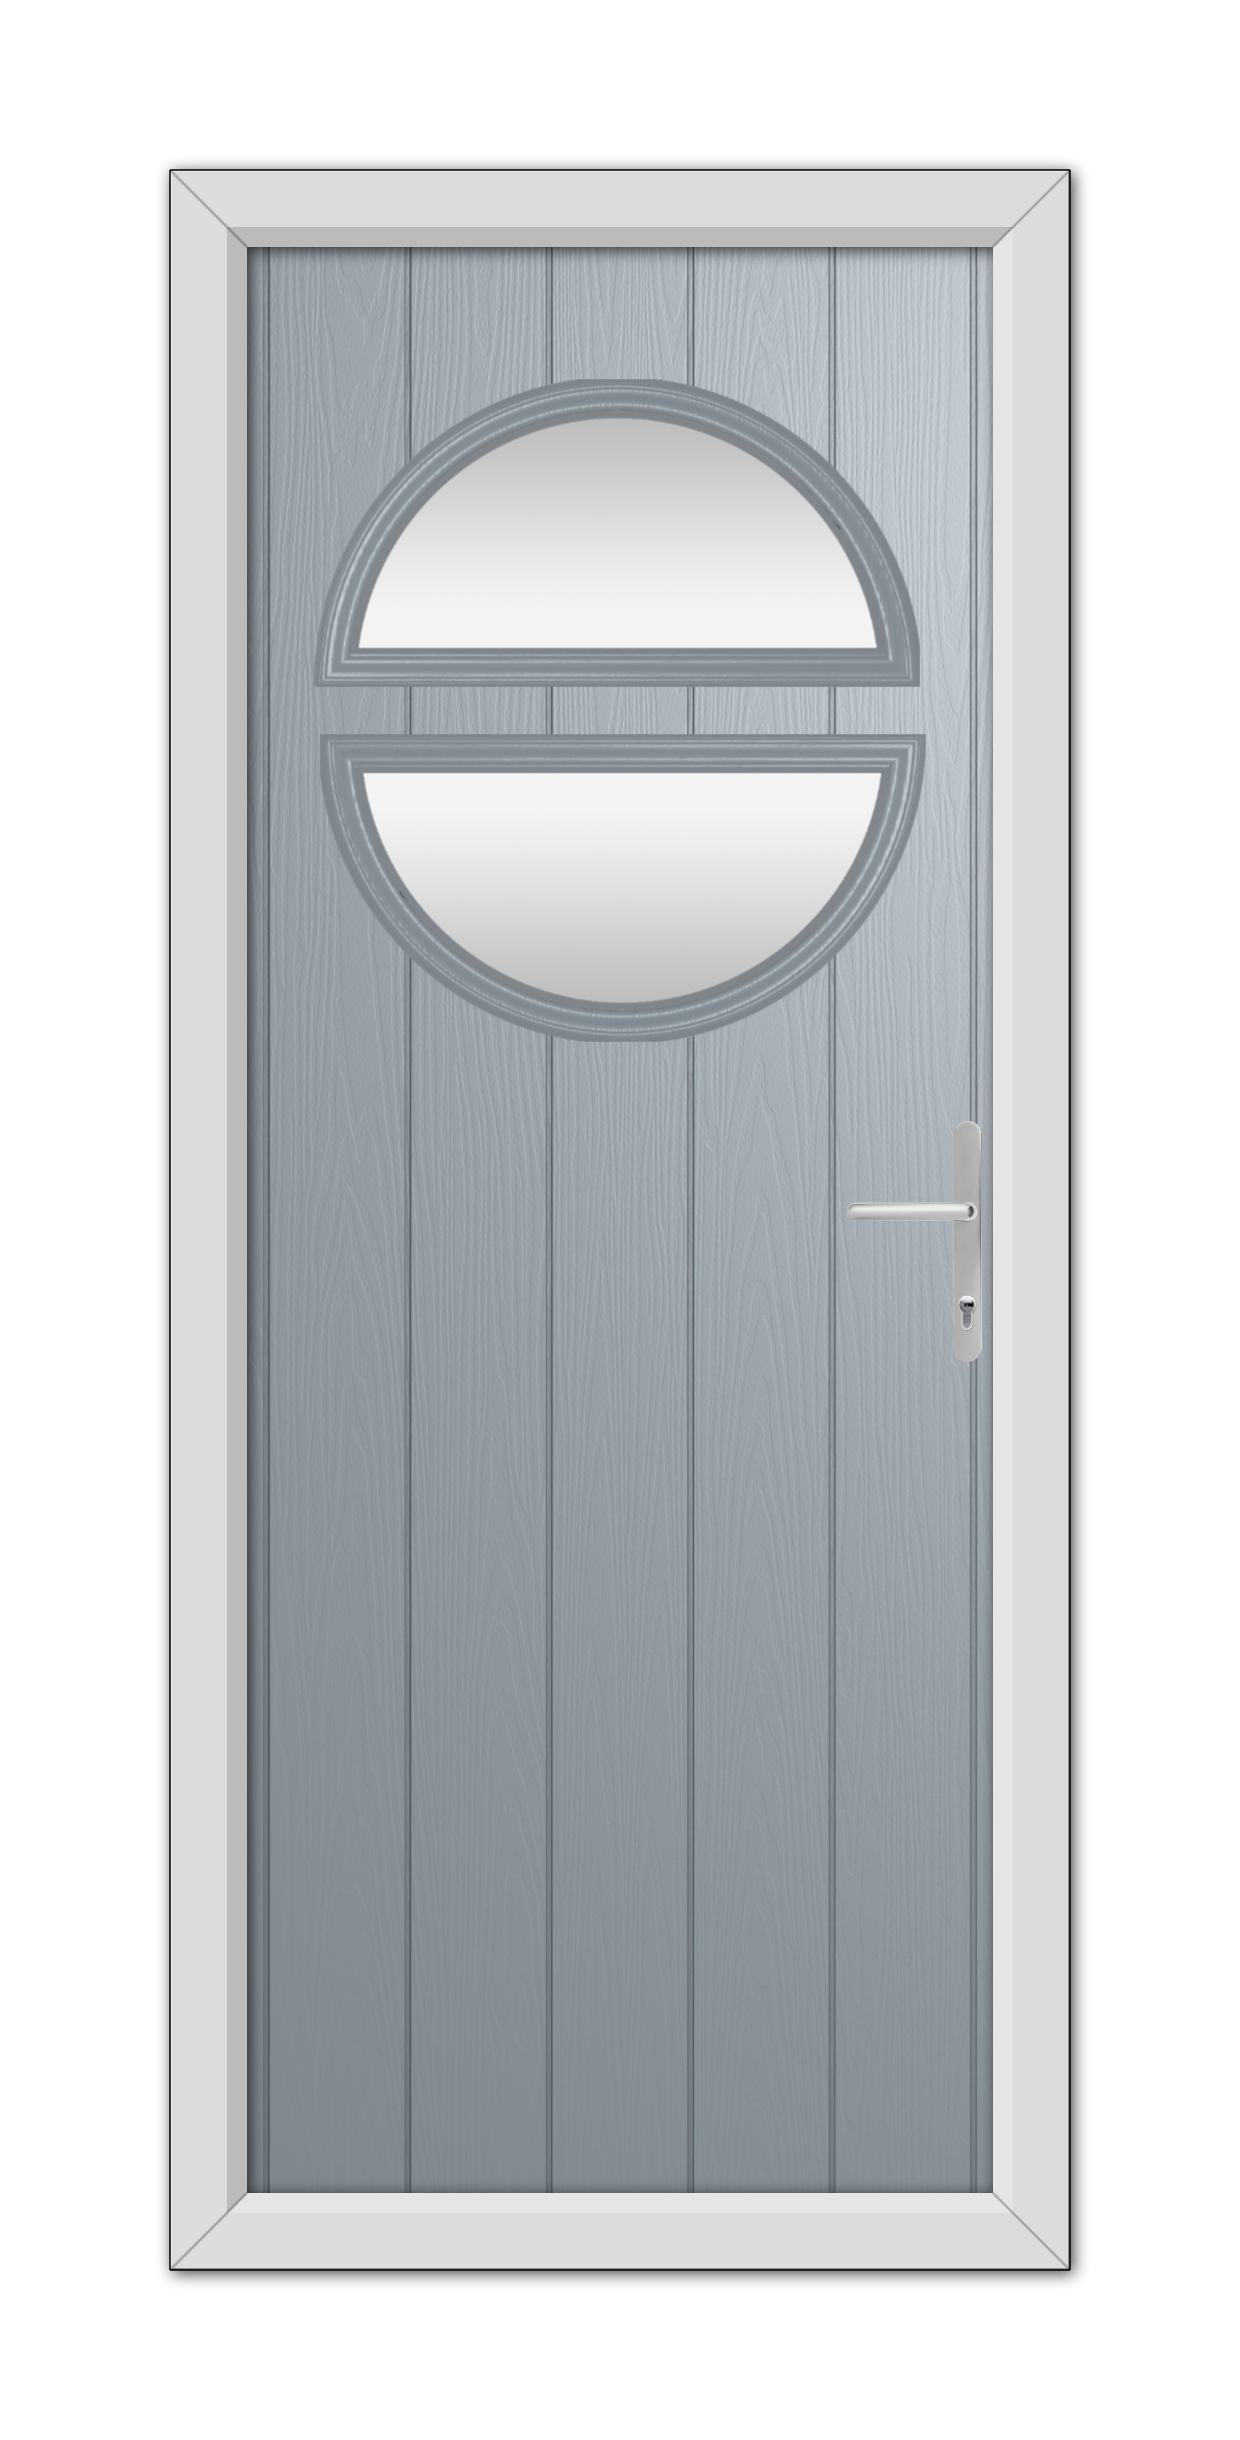 A modern French Grey Kent Composite Door 48mm Timber Core with a horizontal oval-shaped frosted glass window and a silver handle.